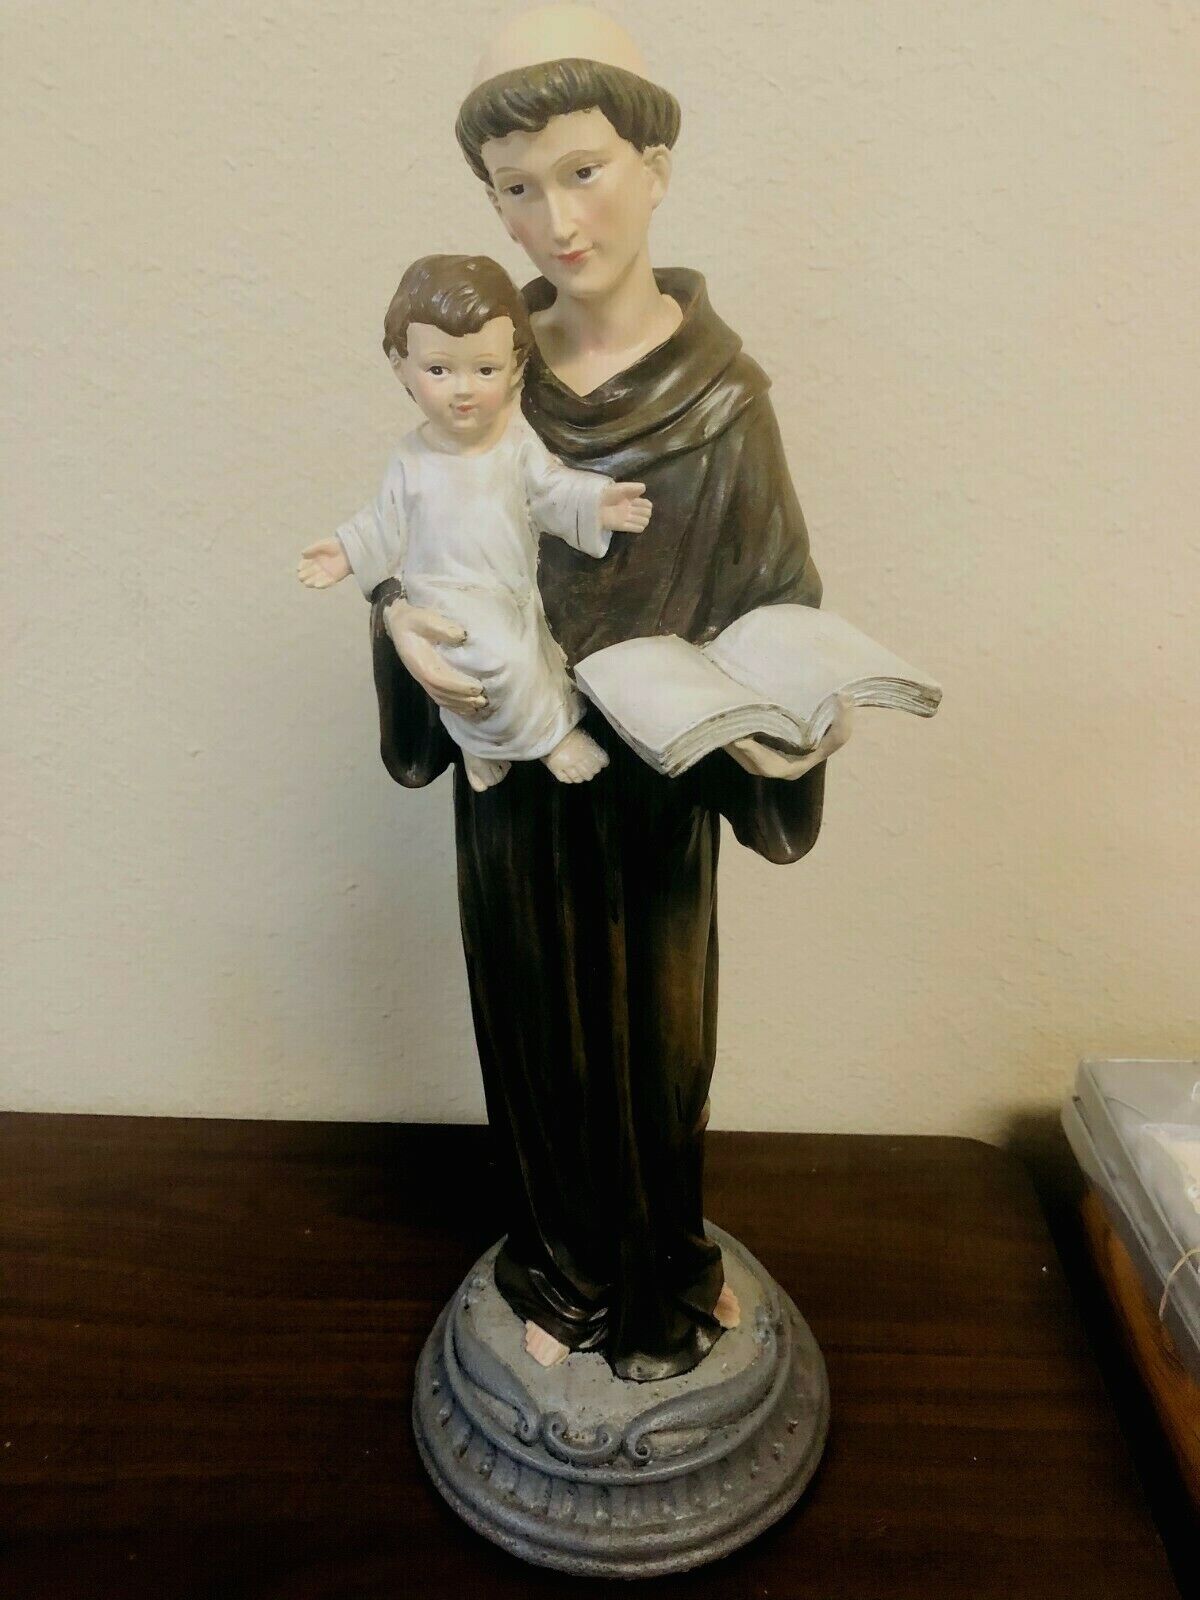 Saint Anthony of Padua Statue 19.75" H, New - Bob and Penny Lord